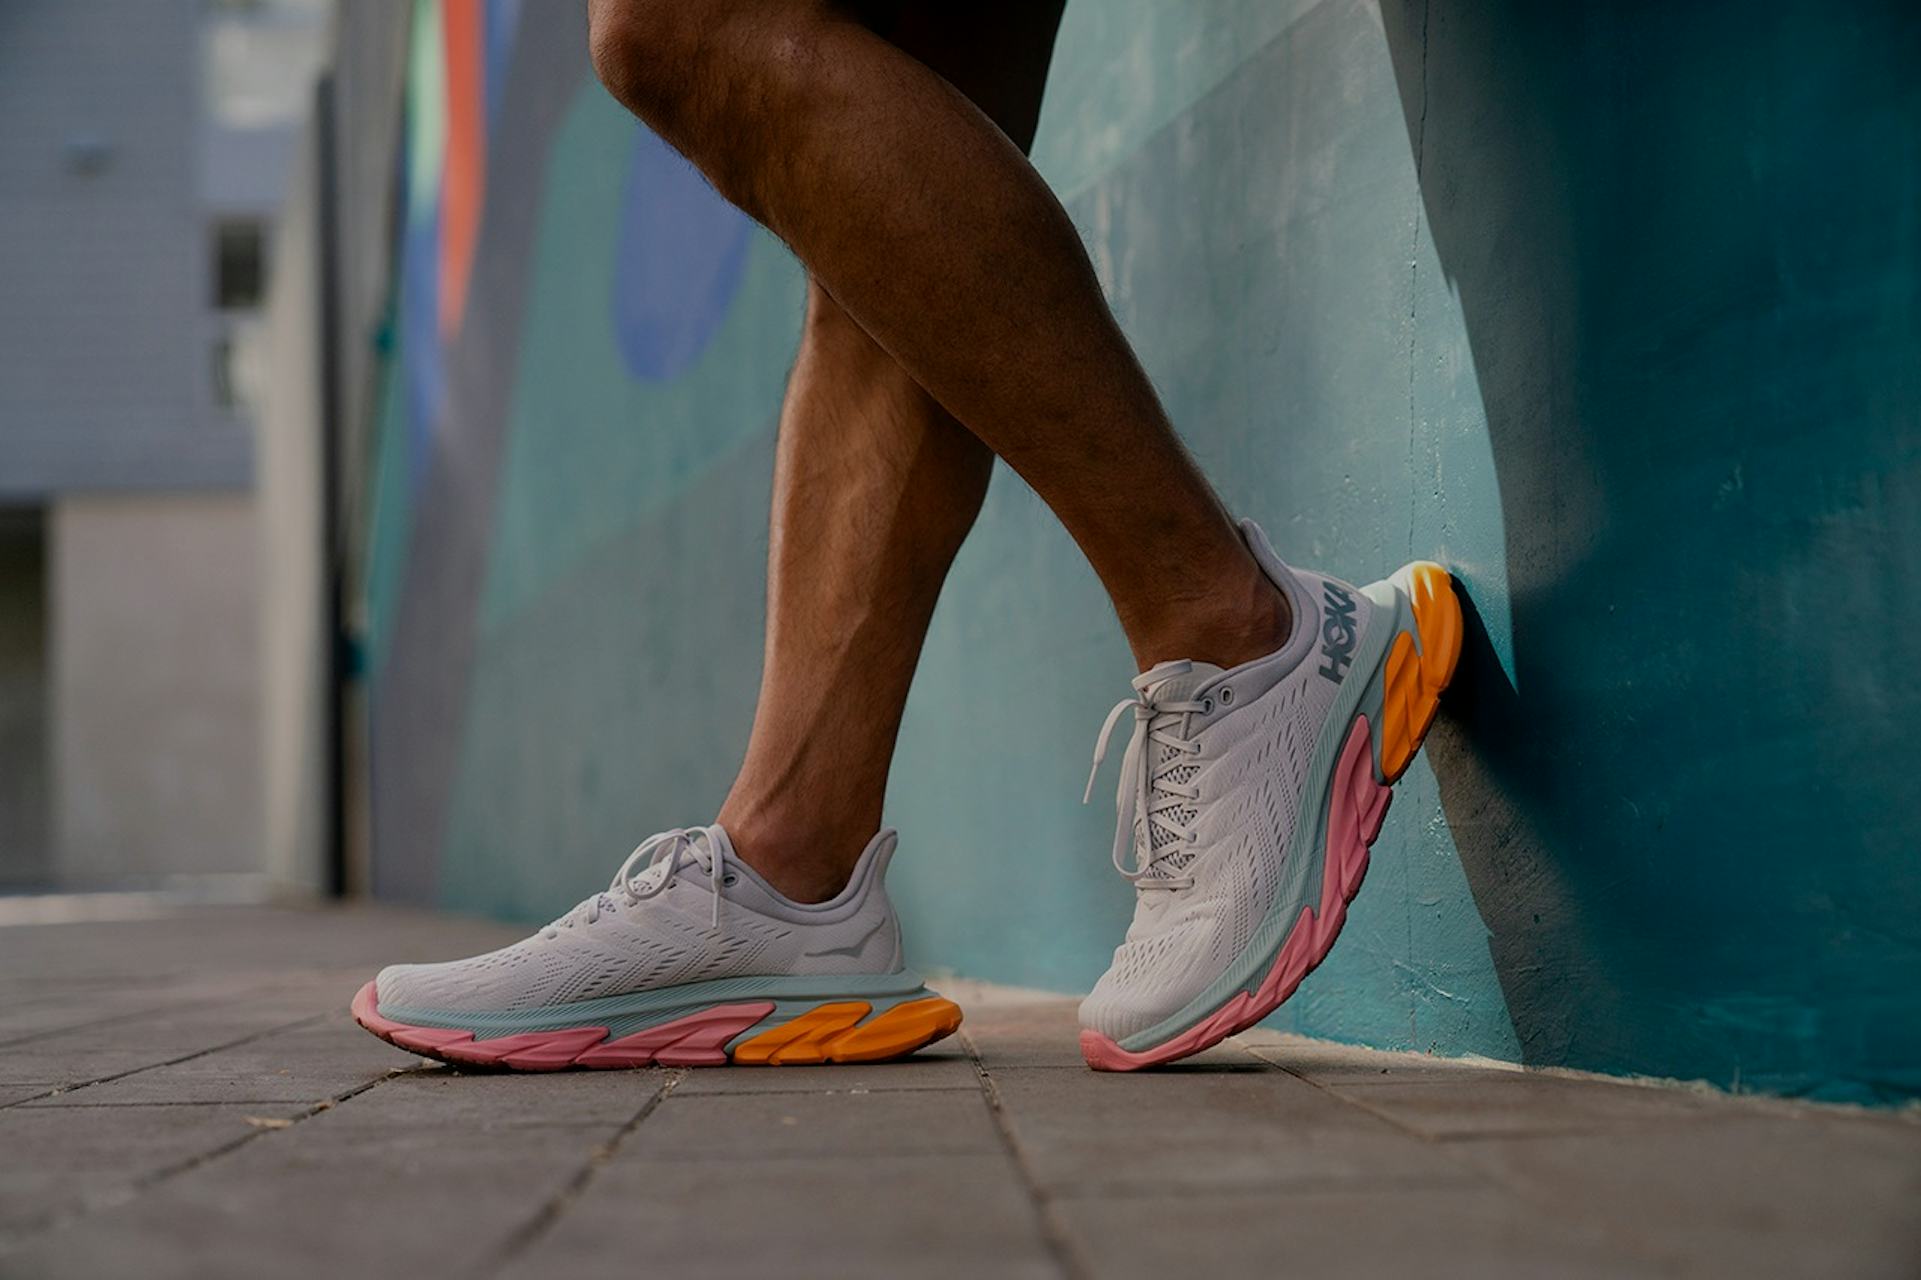 Hoka One One's new Clifton Edge is a hit for runners and non-runners alike